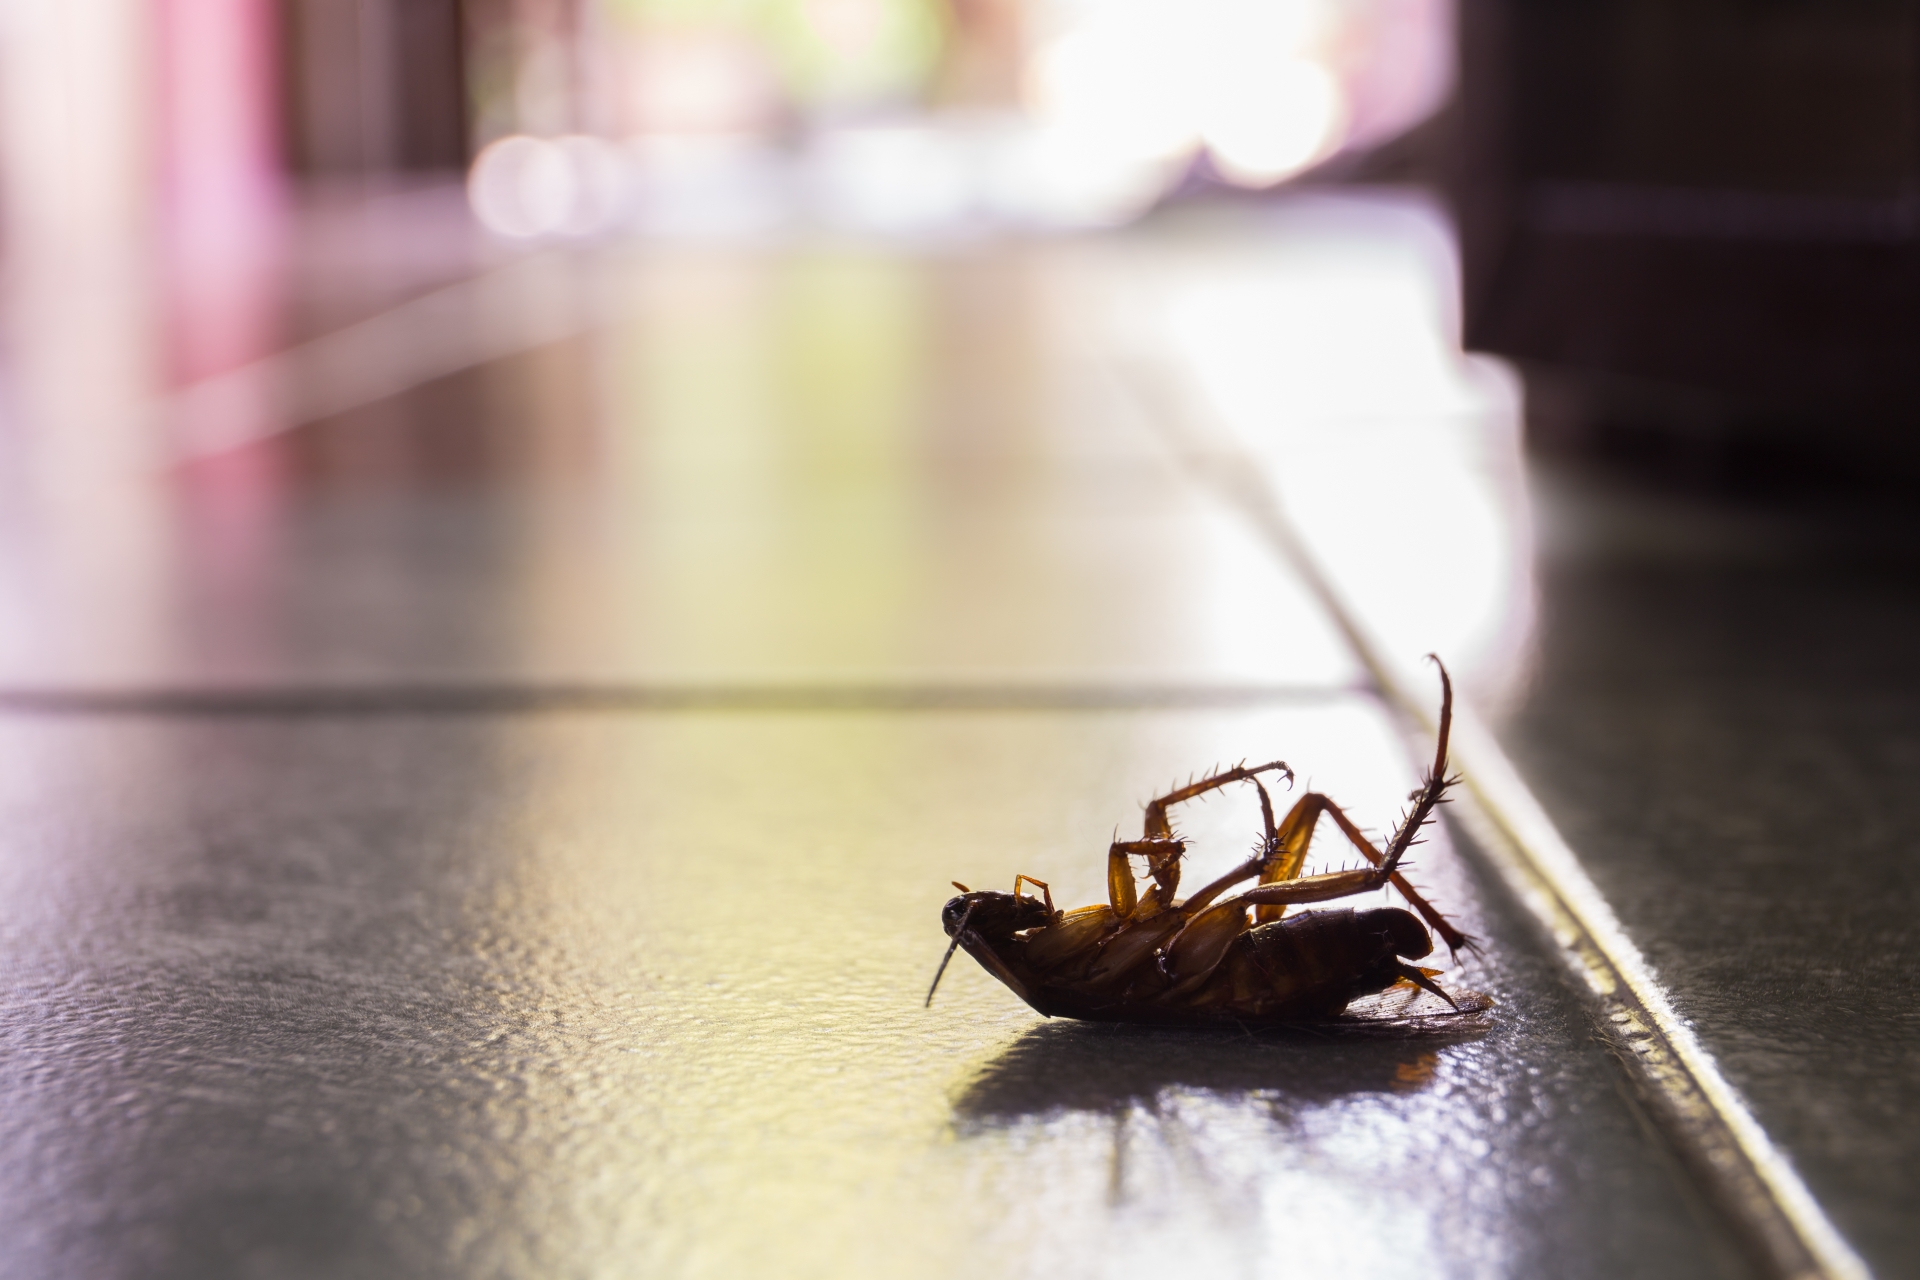 Cockroach Control, Pest Control in Crystal Palace, Upper Norwood, SE19. Call Now 020 8166 9746